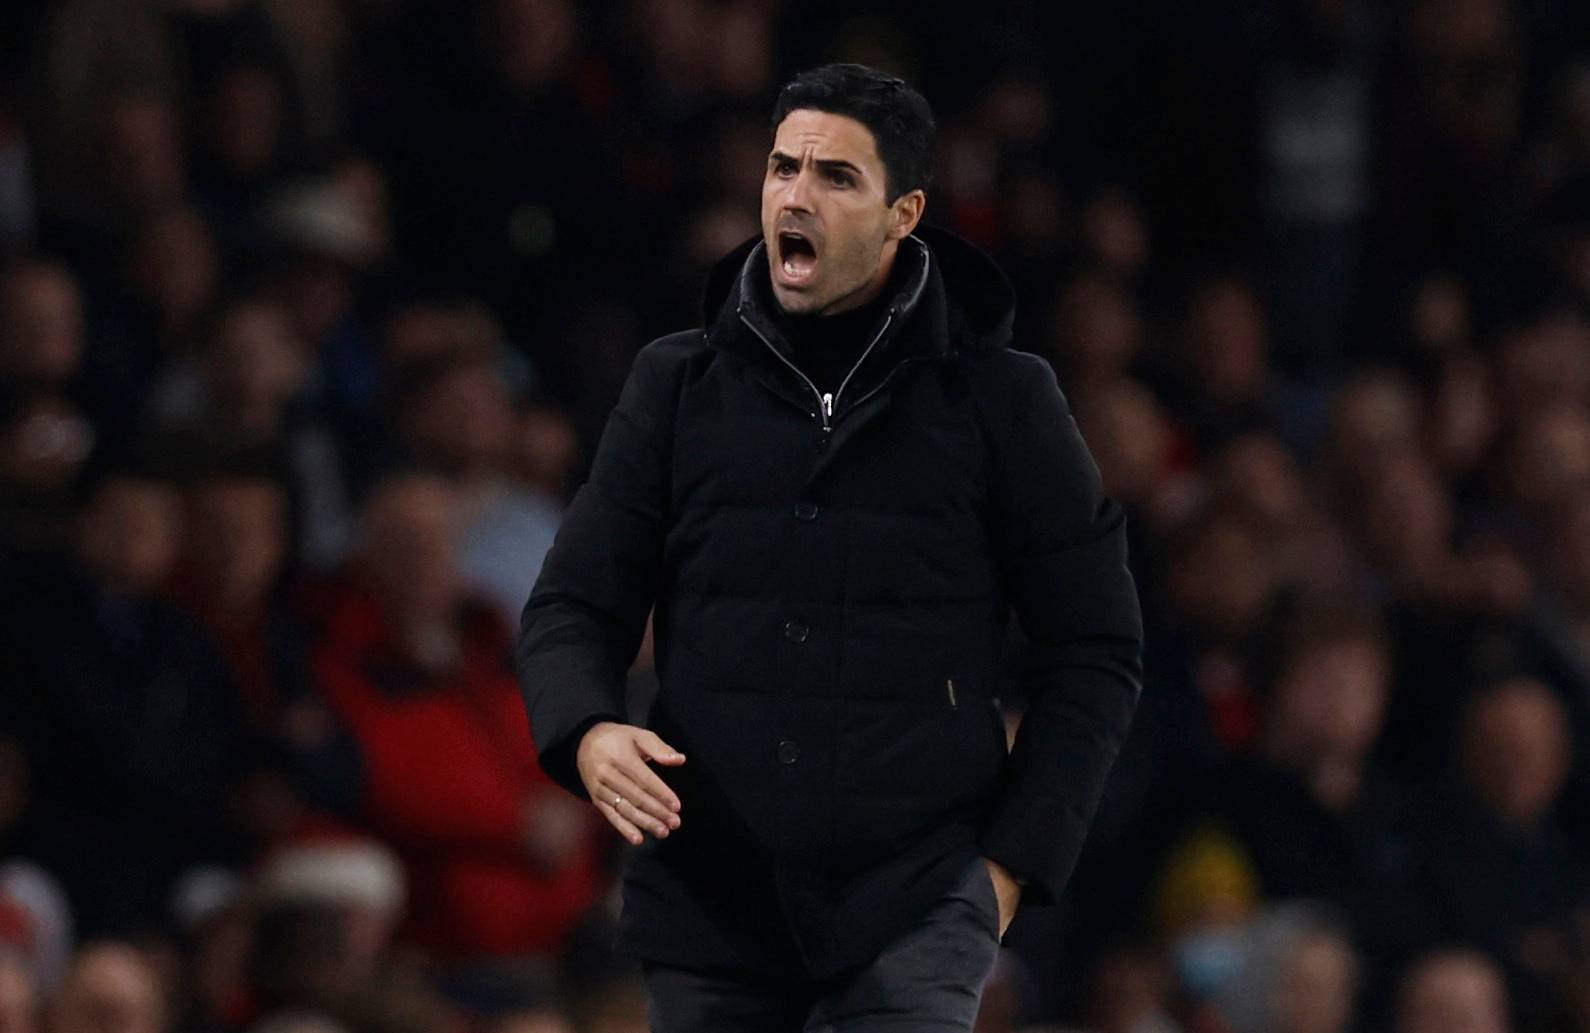 Mikel Arteta on the touchline for Arsenal against Zurich